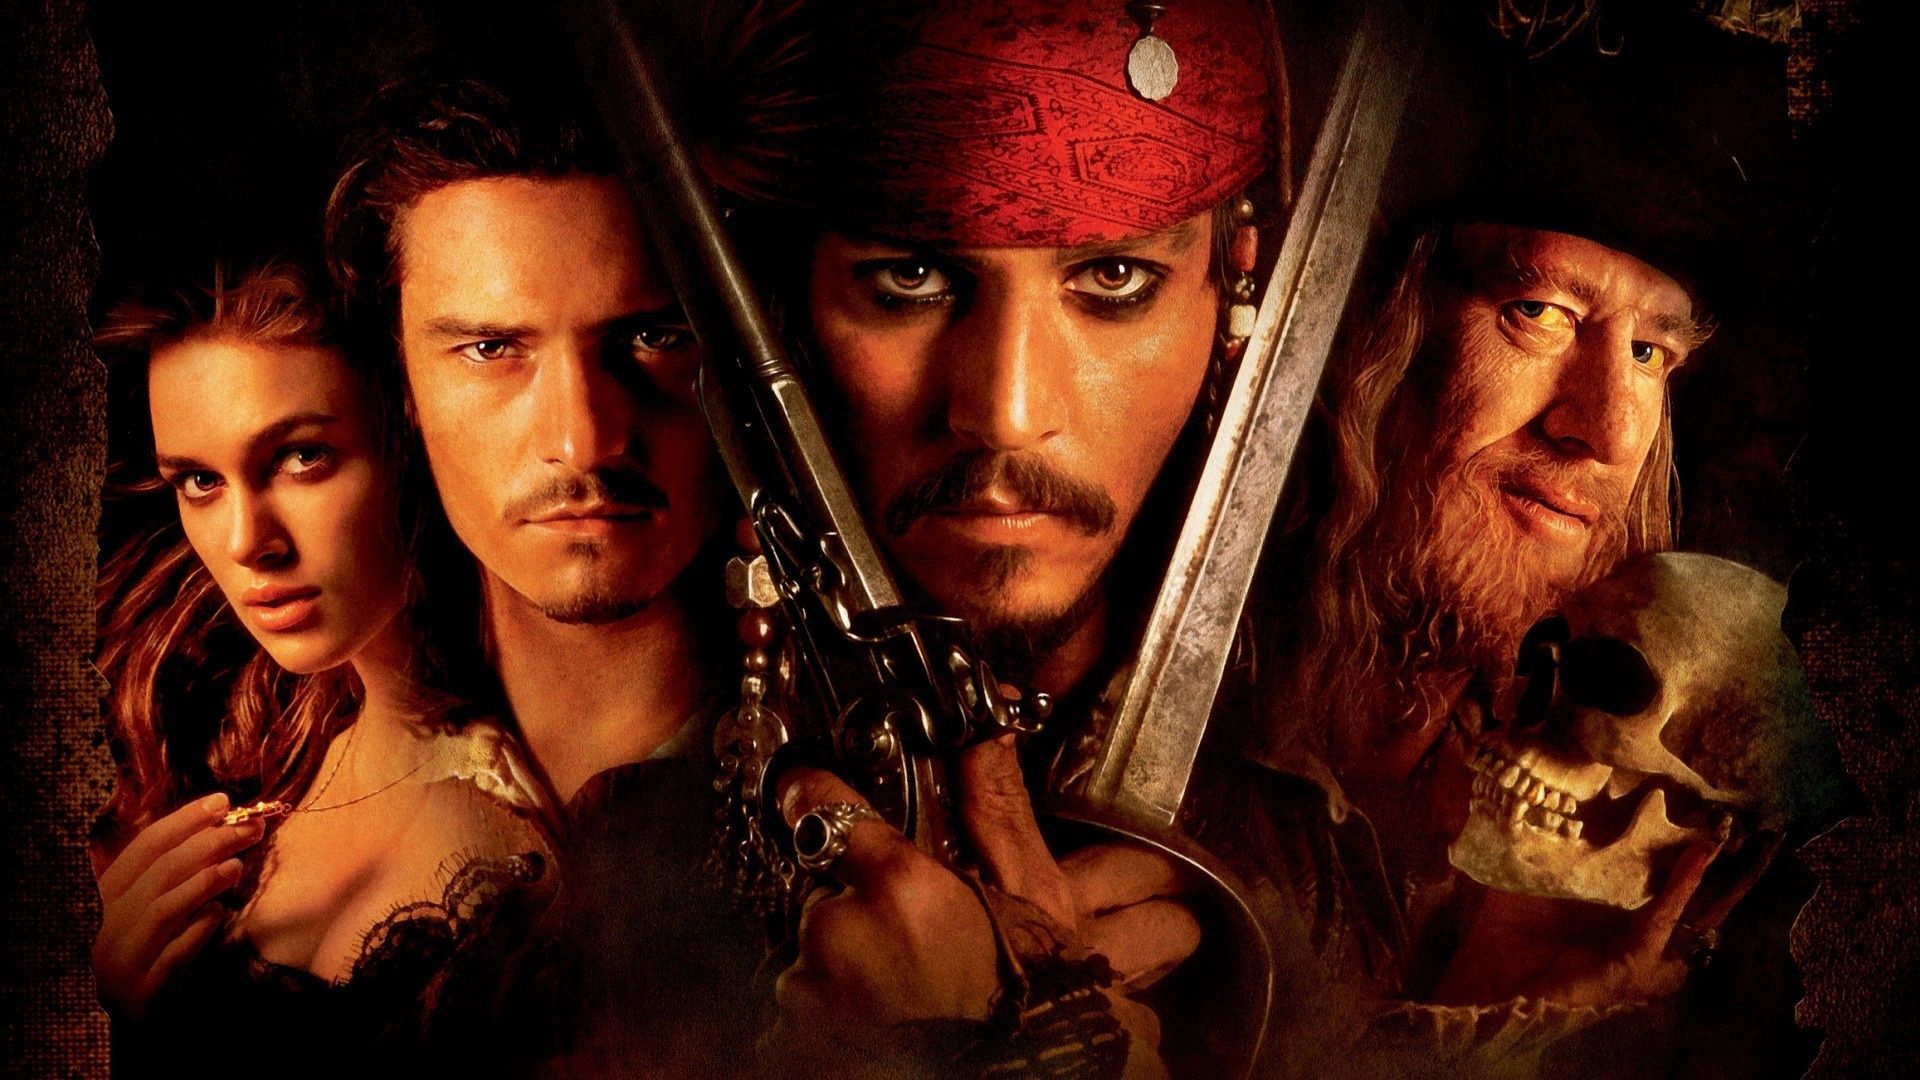 Pirates of the Caribbean: The Curse of the Black Pearl background